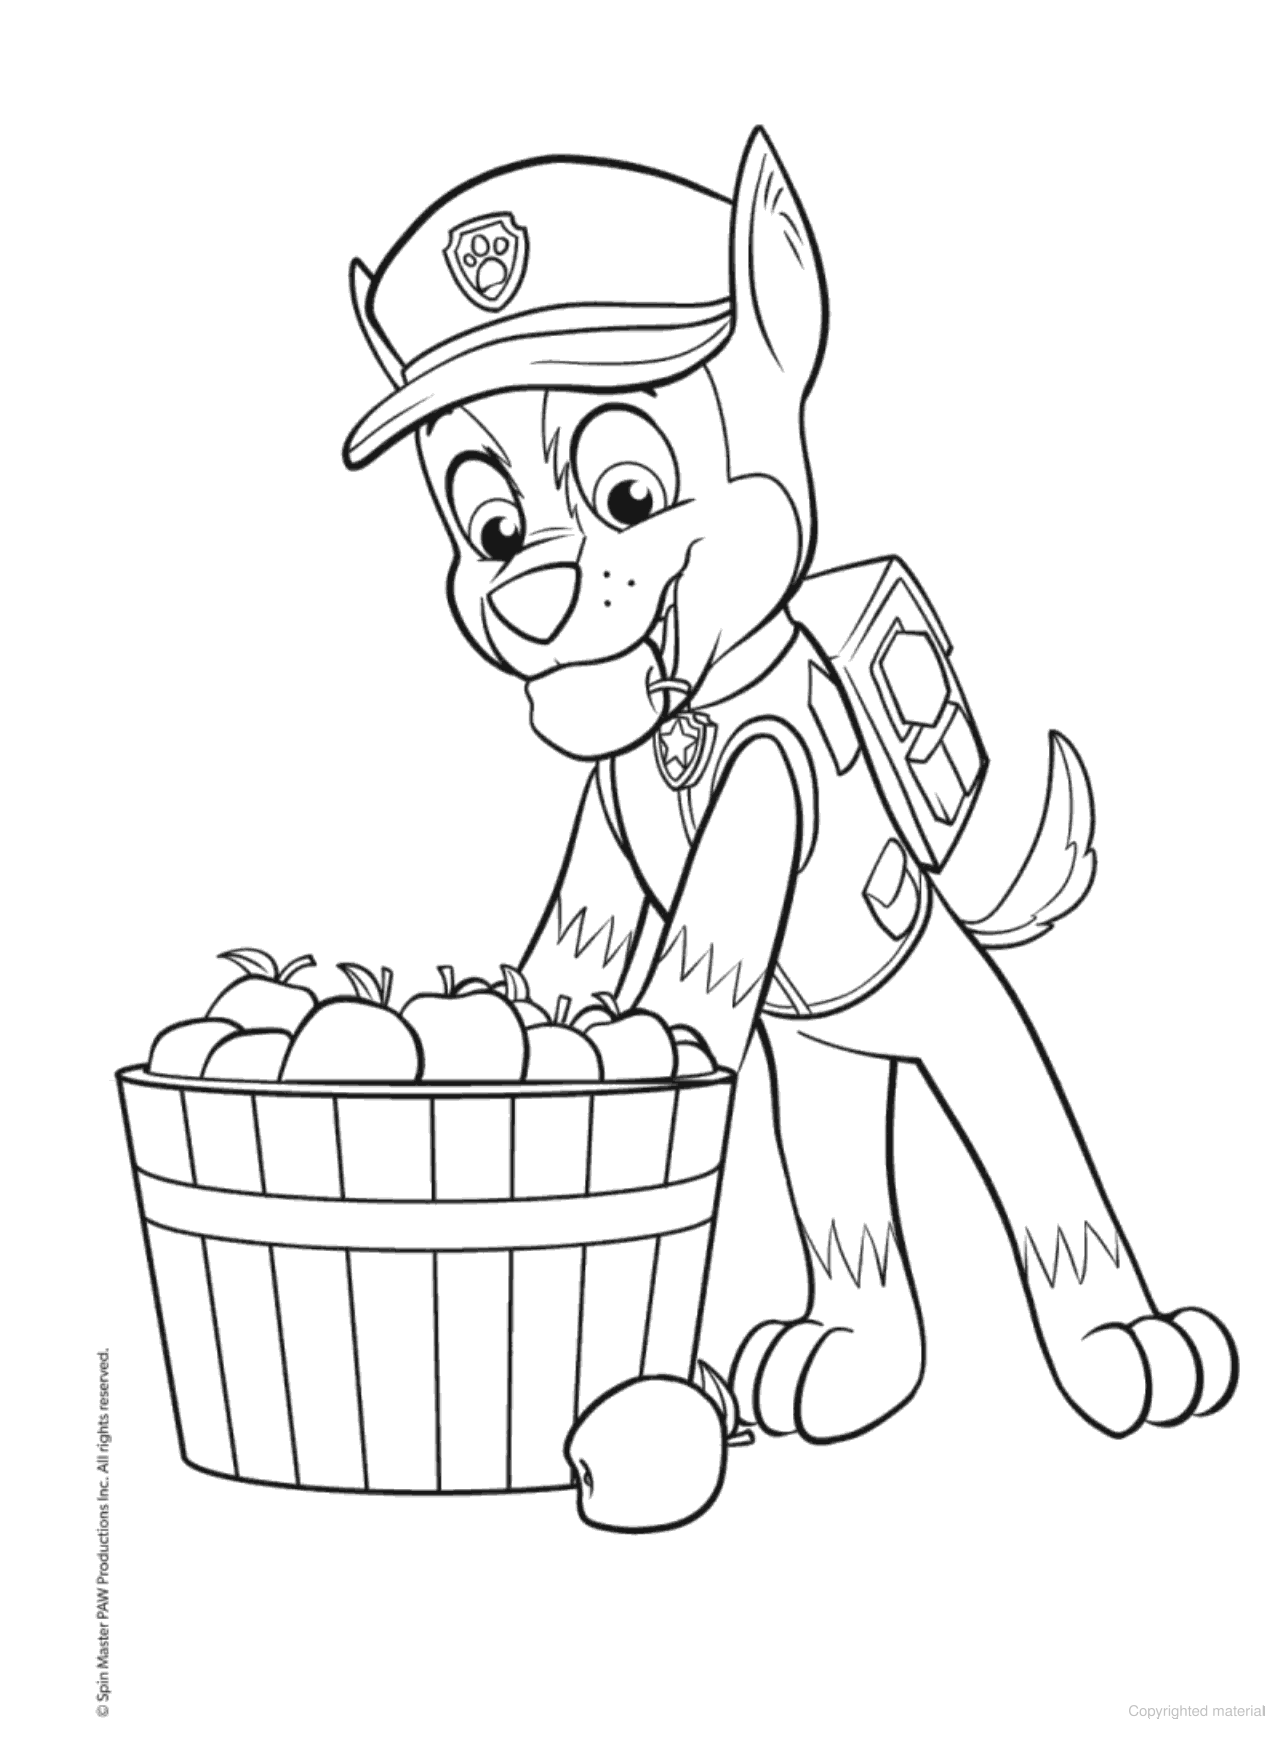 PAW Patrol: My First Coloring Book (PAW Patrol) [Book]